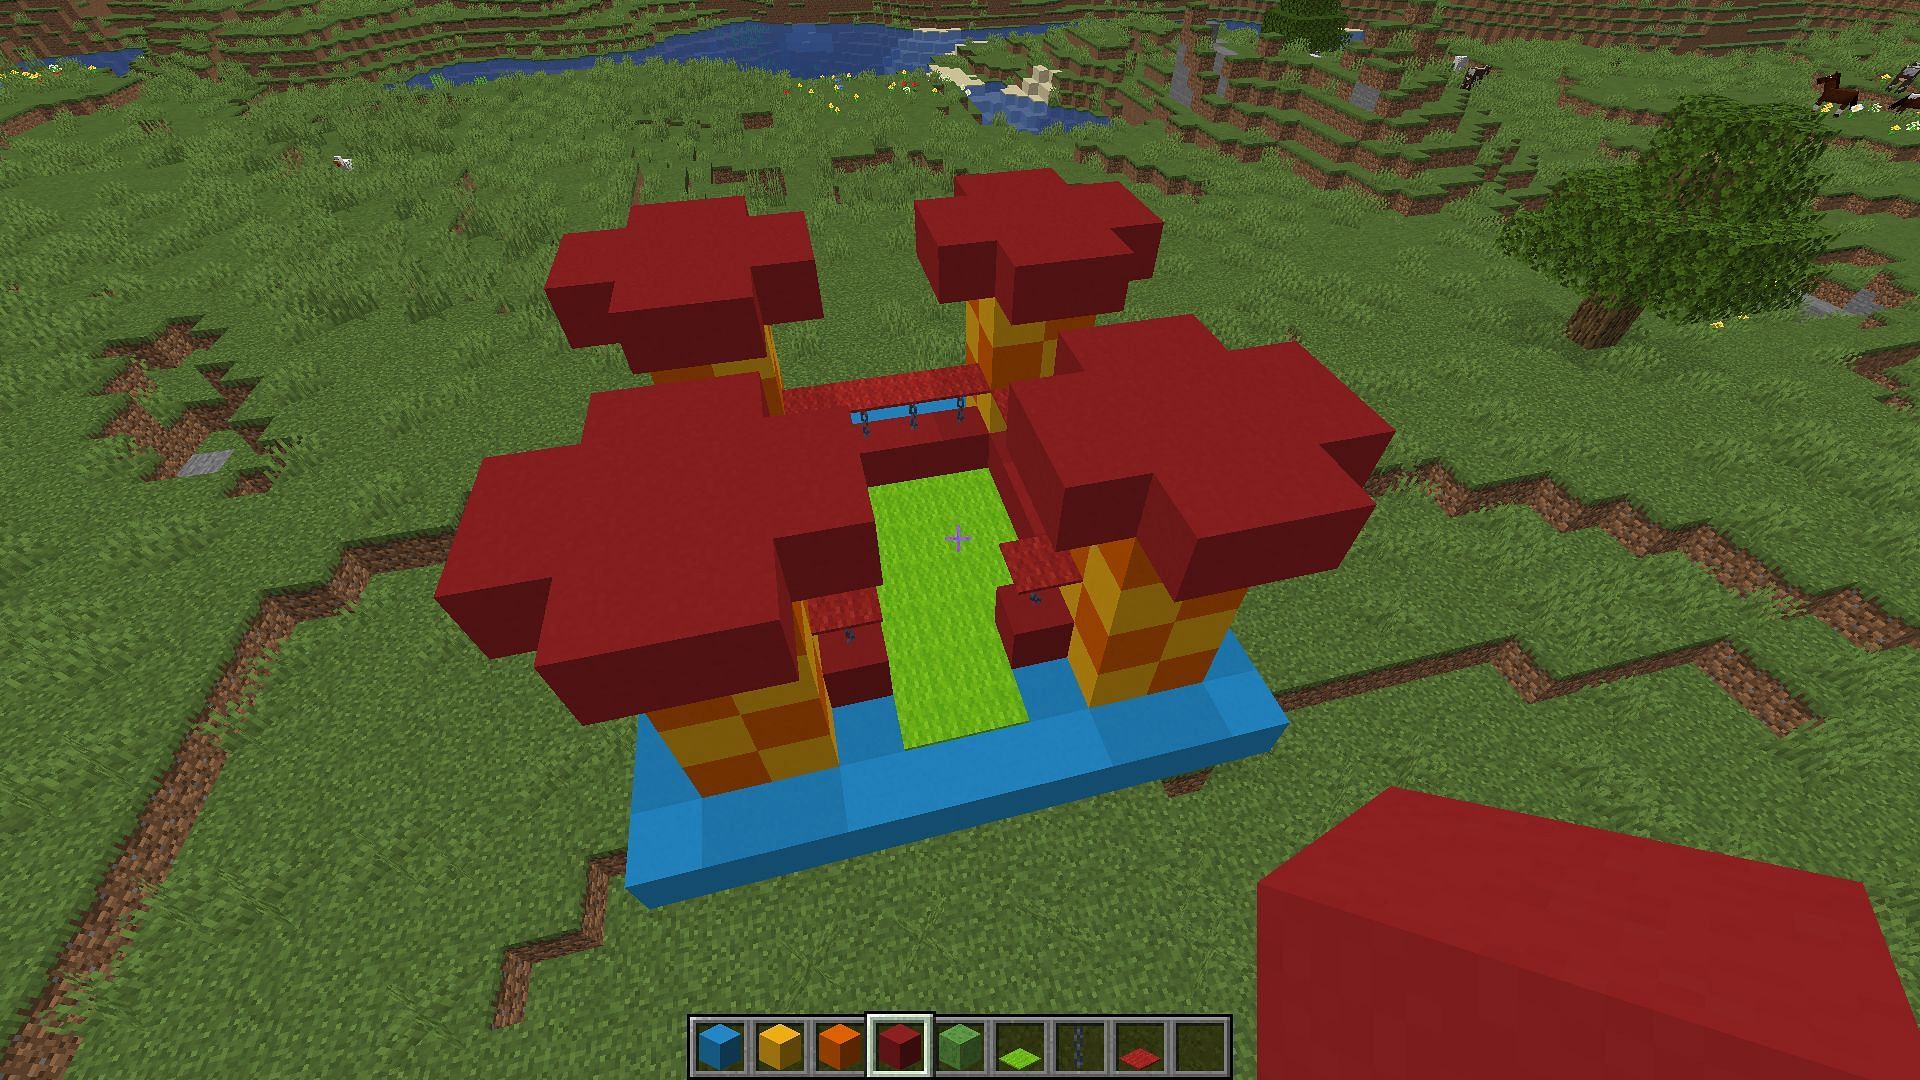 The top of the chessboard pillars added to the bouncy house (Image via Minecraft)